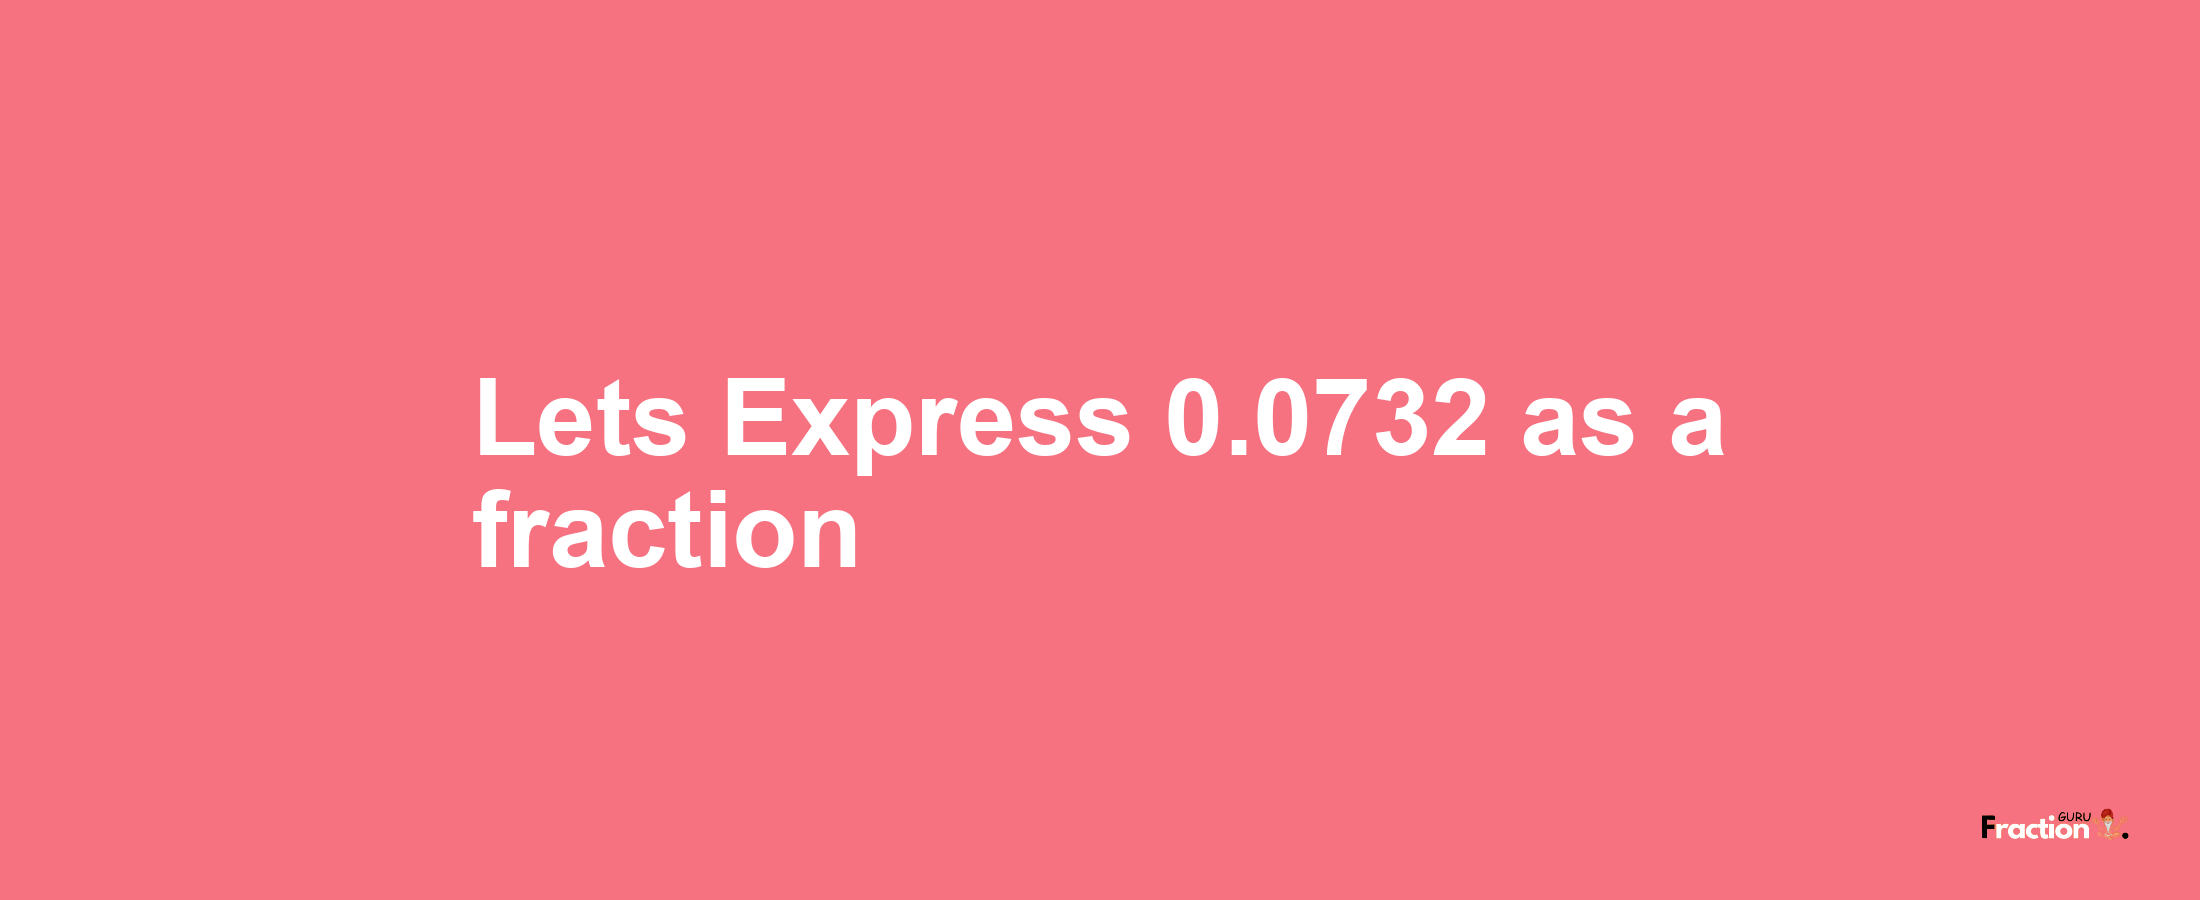 Lets Express 0.0732 as afraction